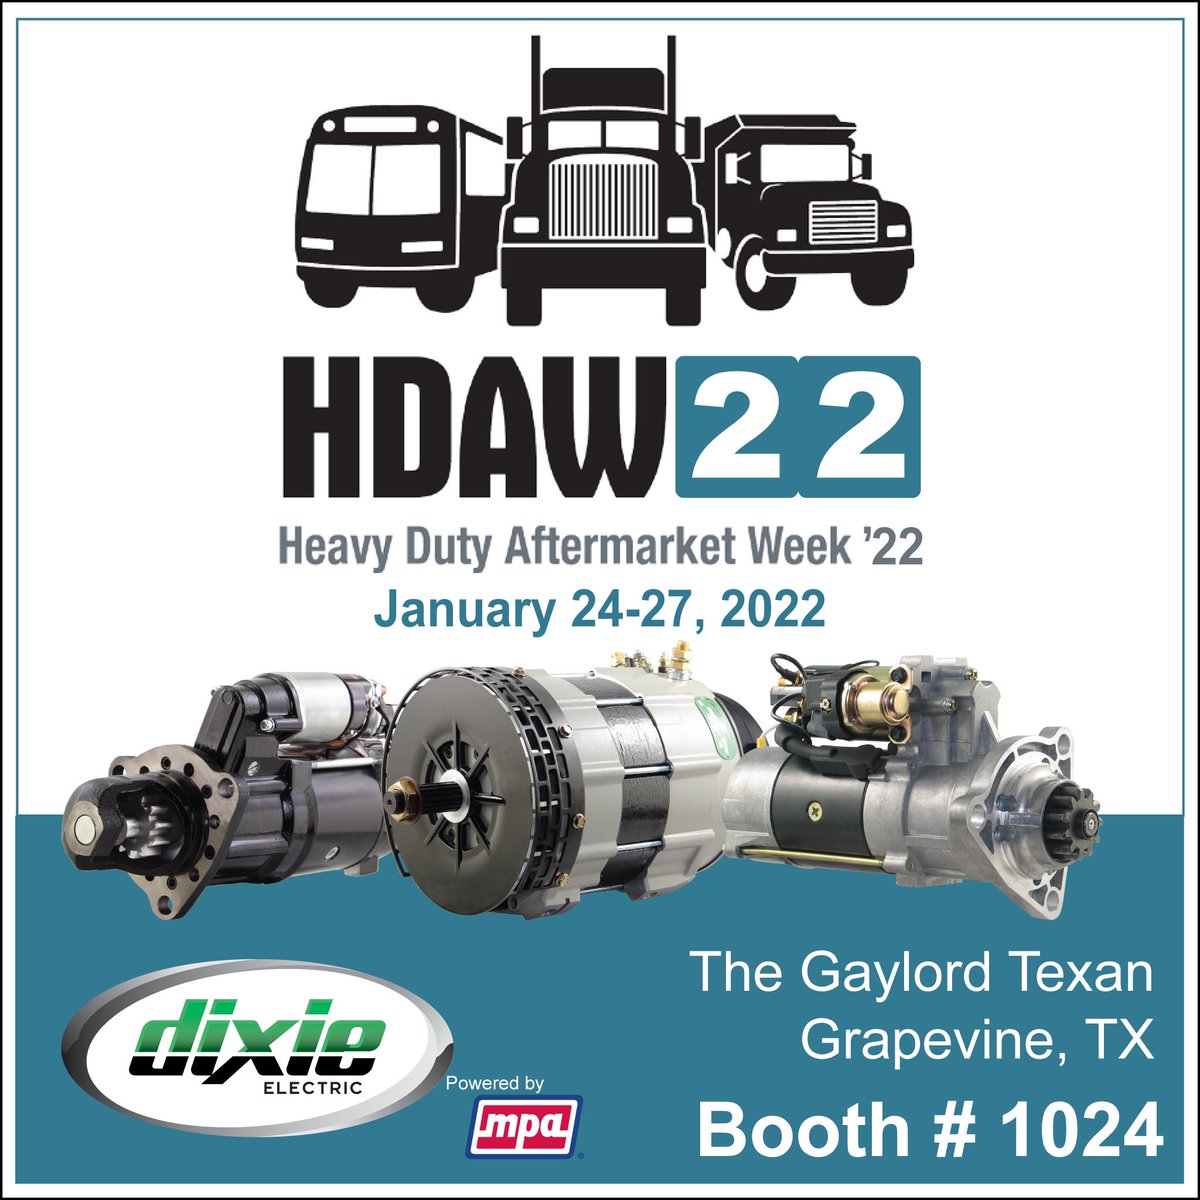 The Heavy Duty Aftermarket Week -  HDAW’22 is around the corner. Come visit us at booth # 1024 to see our HD Starter & Alternators. #HeavyDuty #Alternators #Starters @HDAWConference #HDAW22